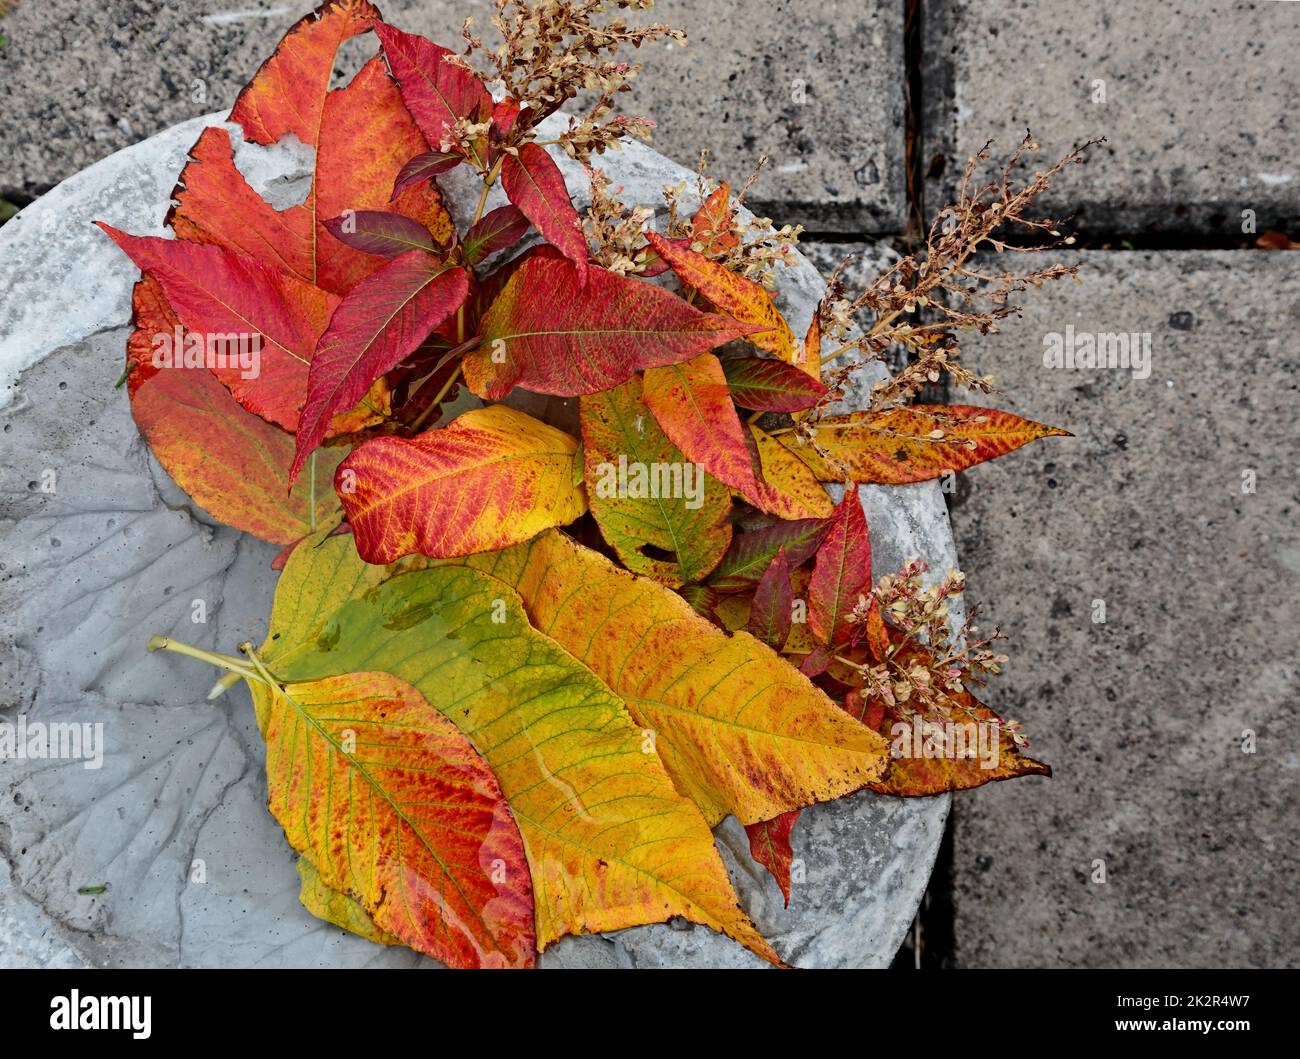 Red and yellow leaves in autumnal setting Stock Photo